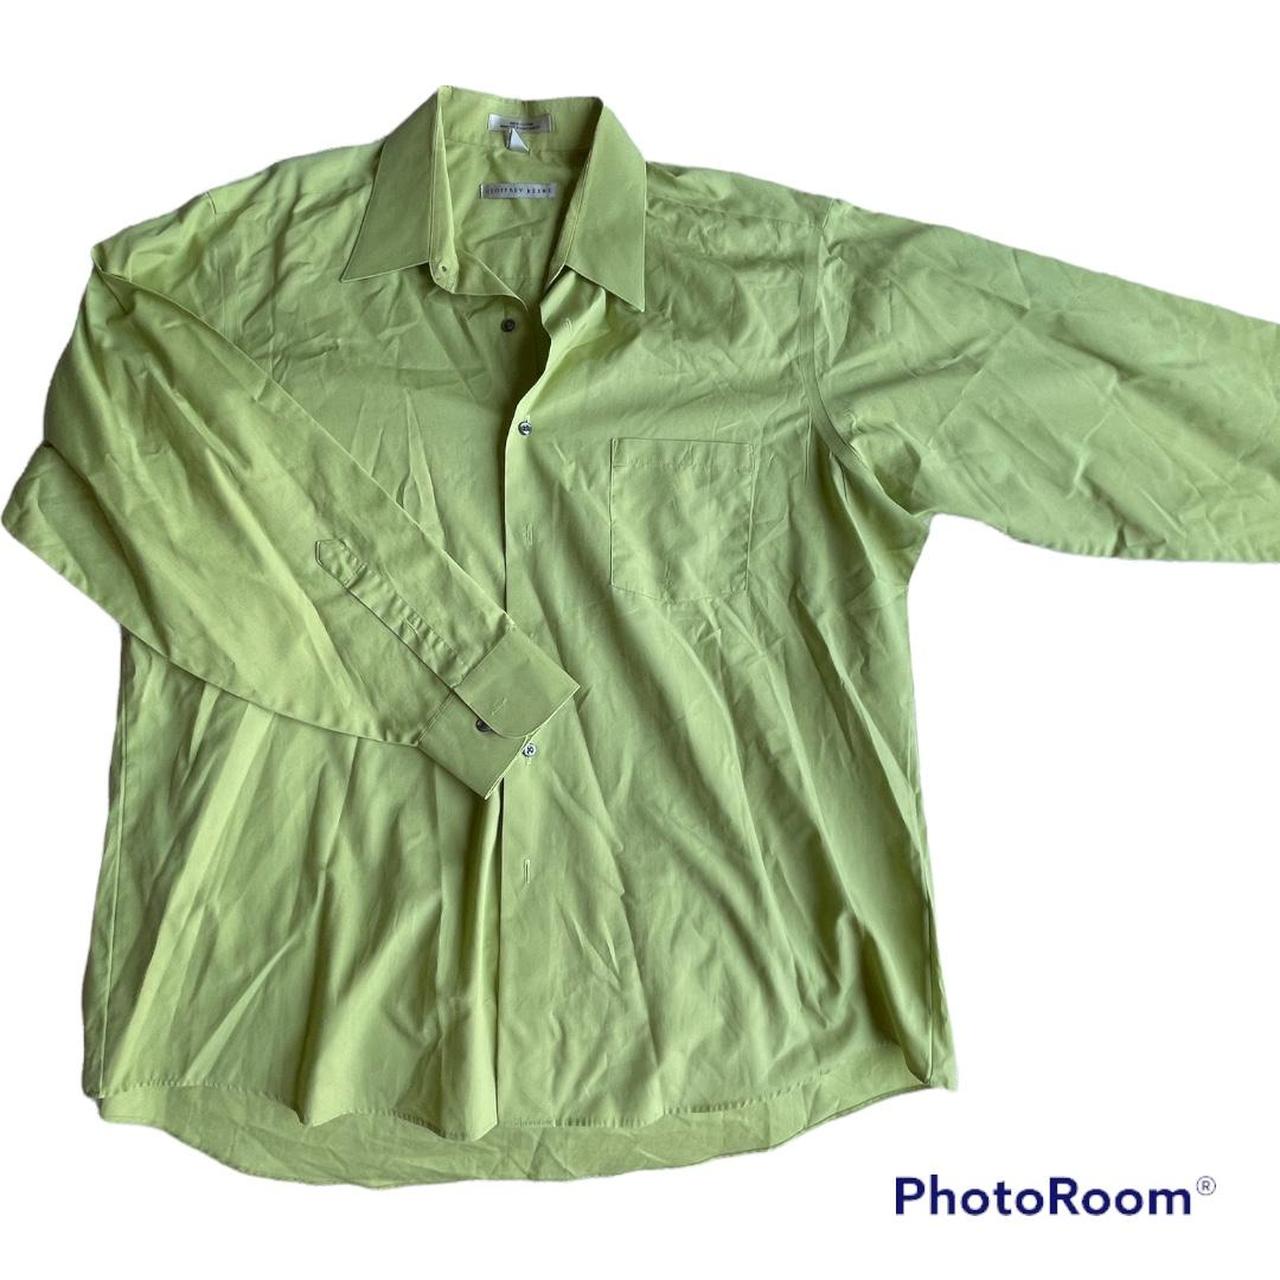 Product Image 1 - Men’s Lime Green Cotton Bright